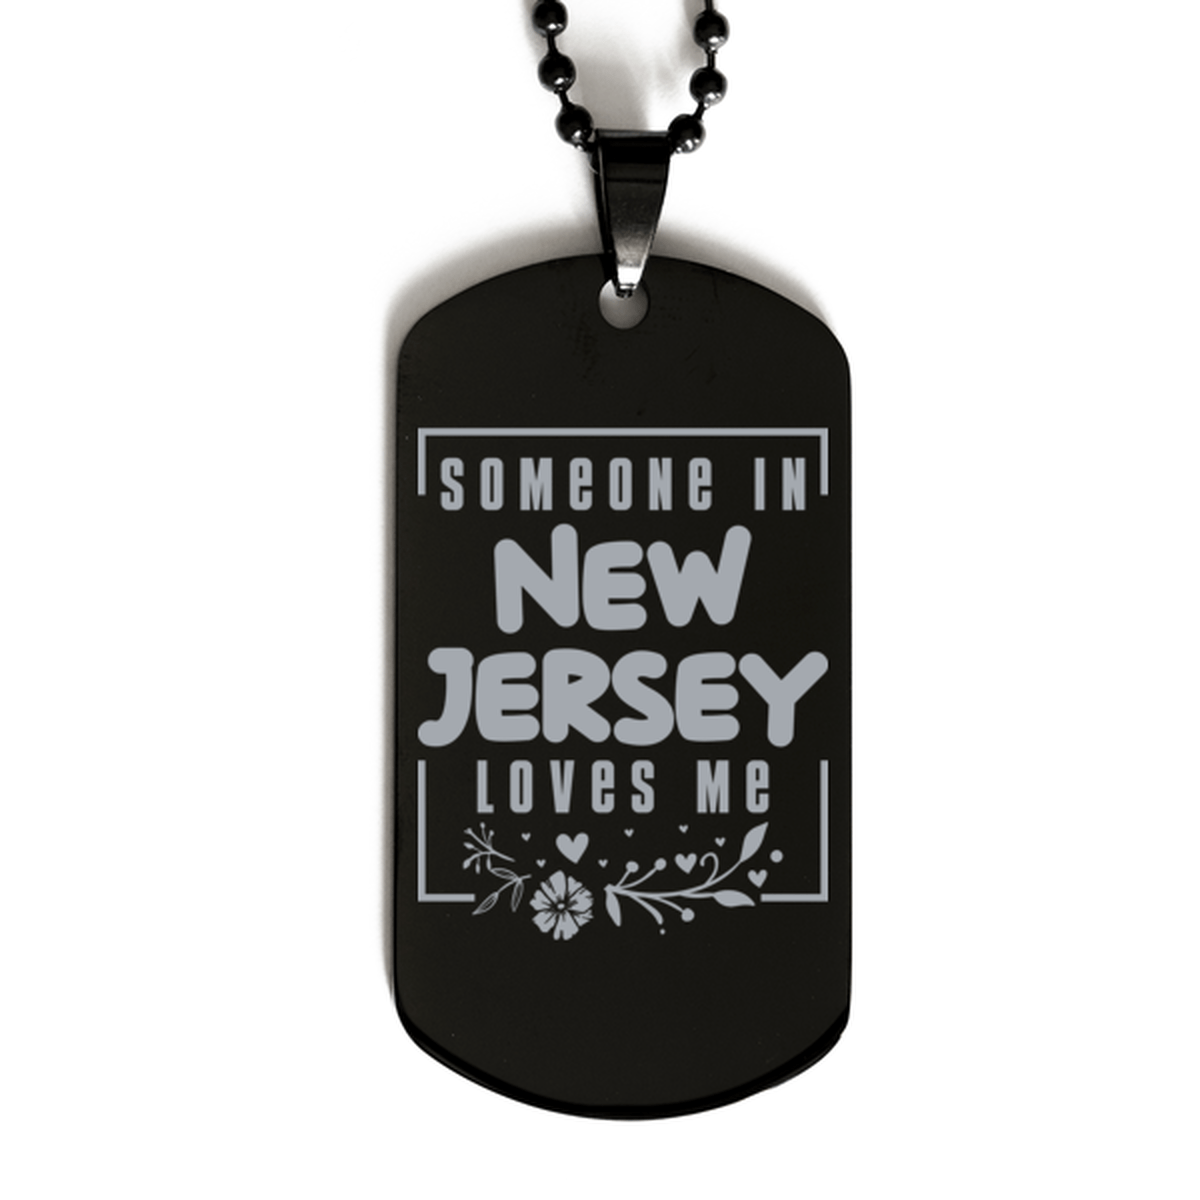 Cute New Jersey Black Dog Tag Necklace, Someone in New Jersey Loves Me, Best Birthday Gifts from New Jersey Friends & Family